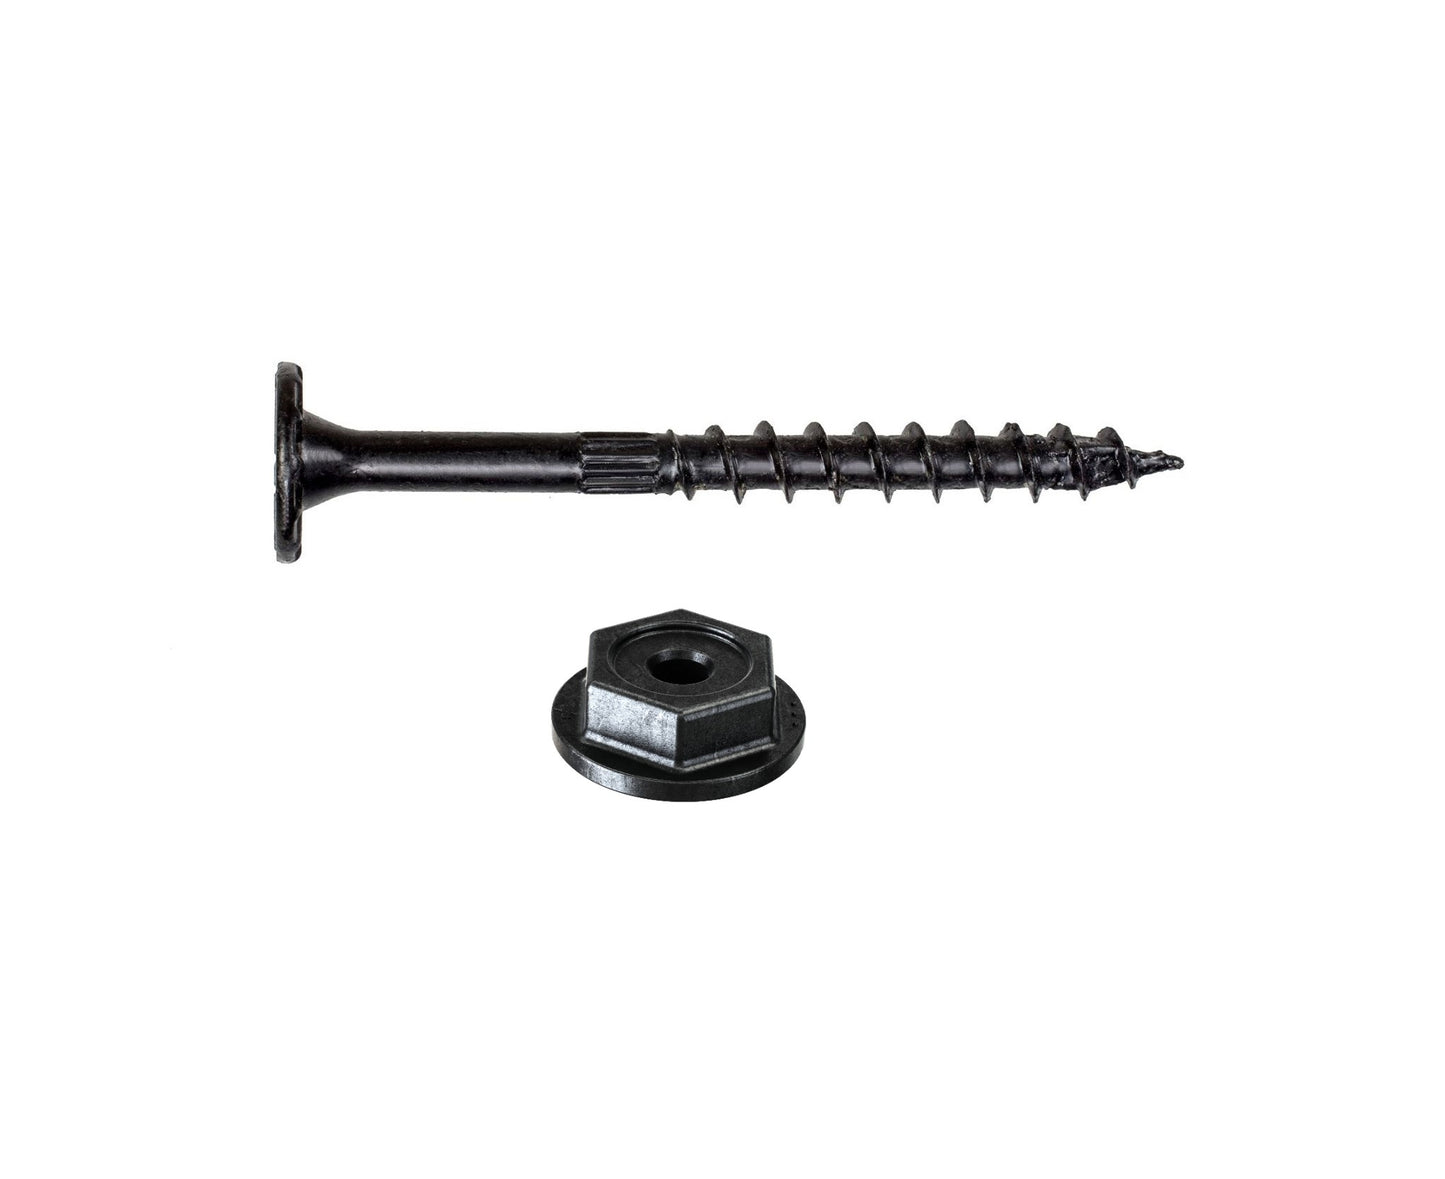 0.220" x 3-1/2" Strong-Tie SDWS22312DBBRN1 Structural Screw T40 Star - Double Barrier Black Coating, Pkg 1